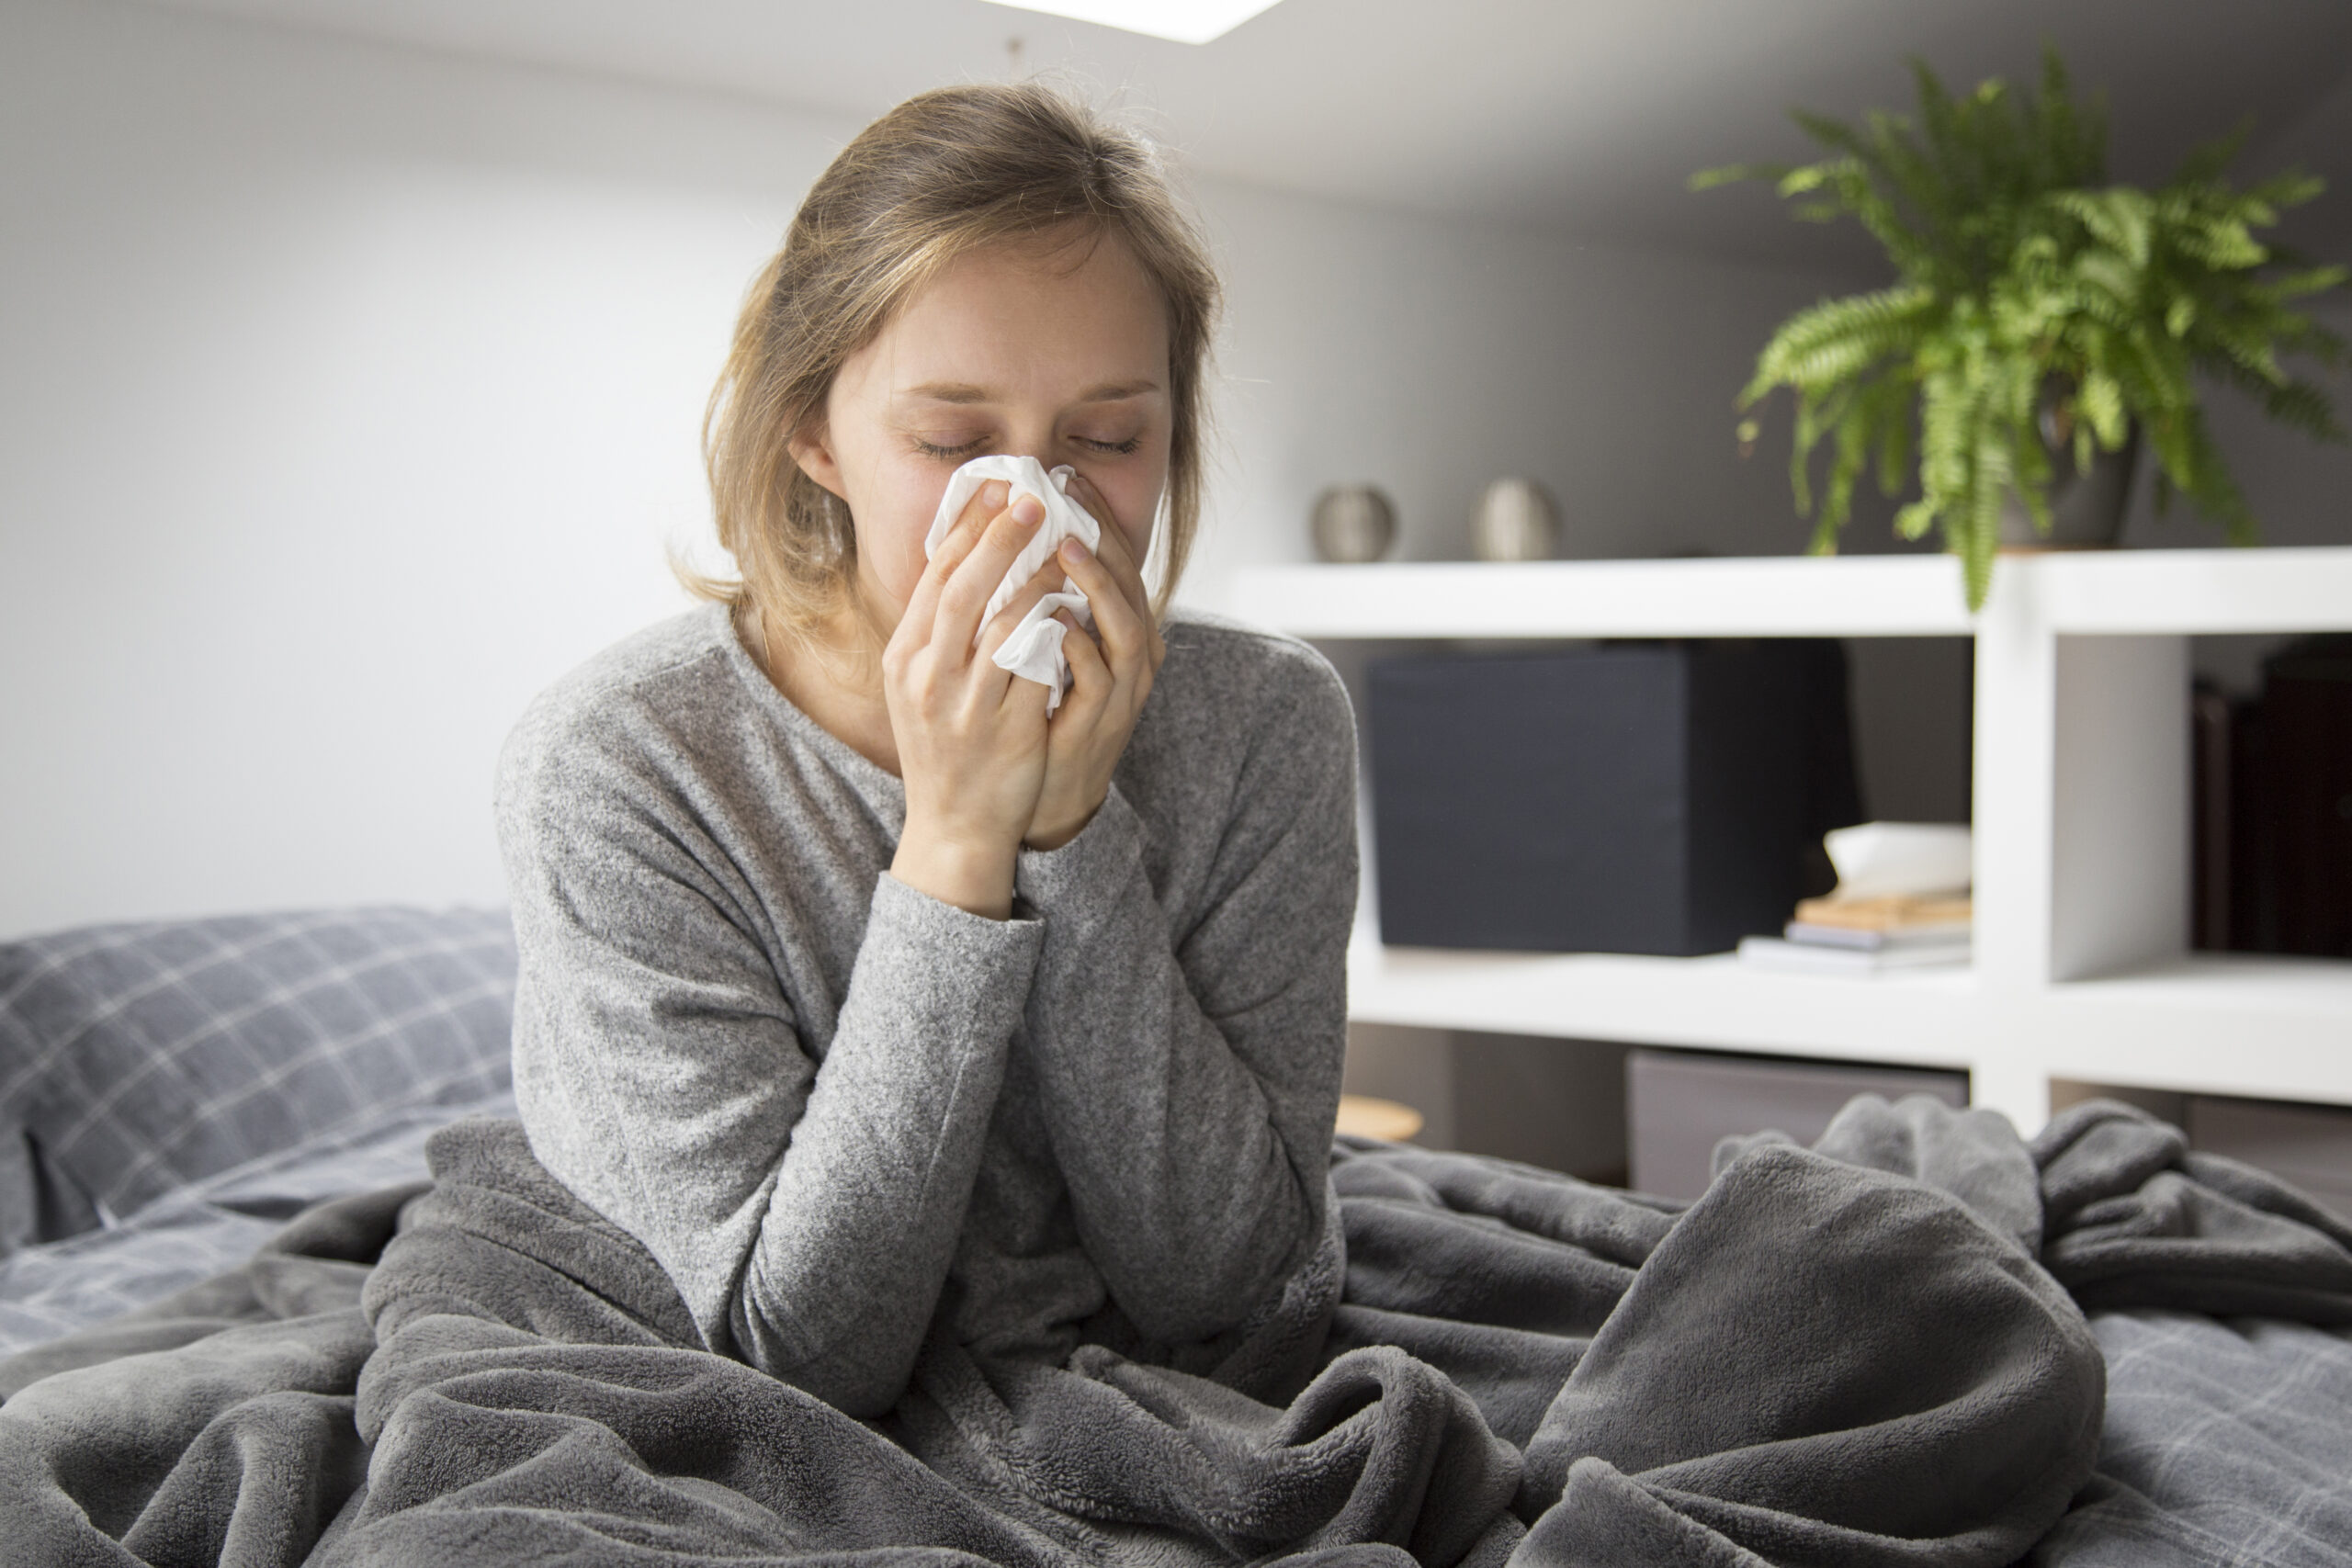 Sinus Infection: What Is, Symptoms, Causes, and Easy Treatment